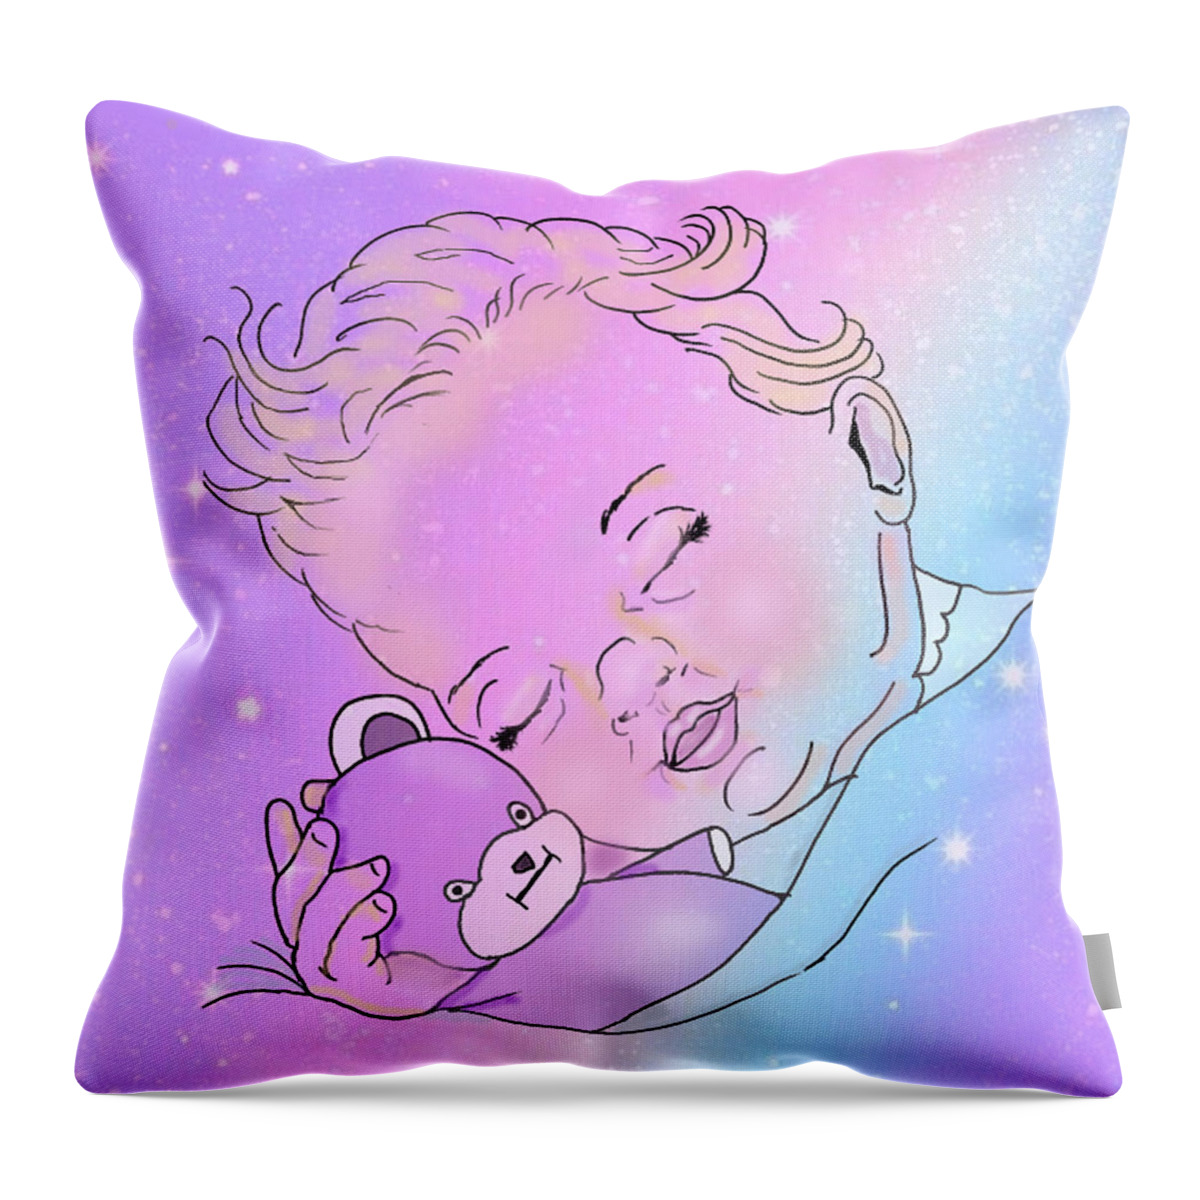 Baby Throw Pillow featuring the digital art Twinkle, Twinkle Little Dreams by Kelly Mills